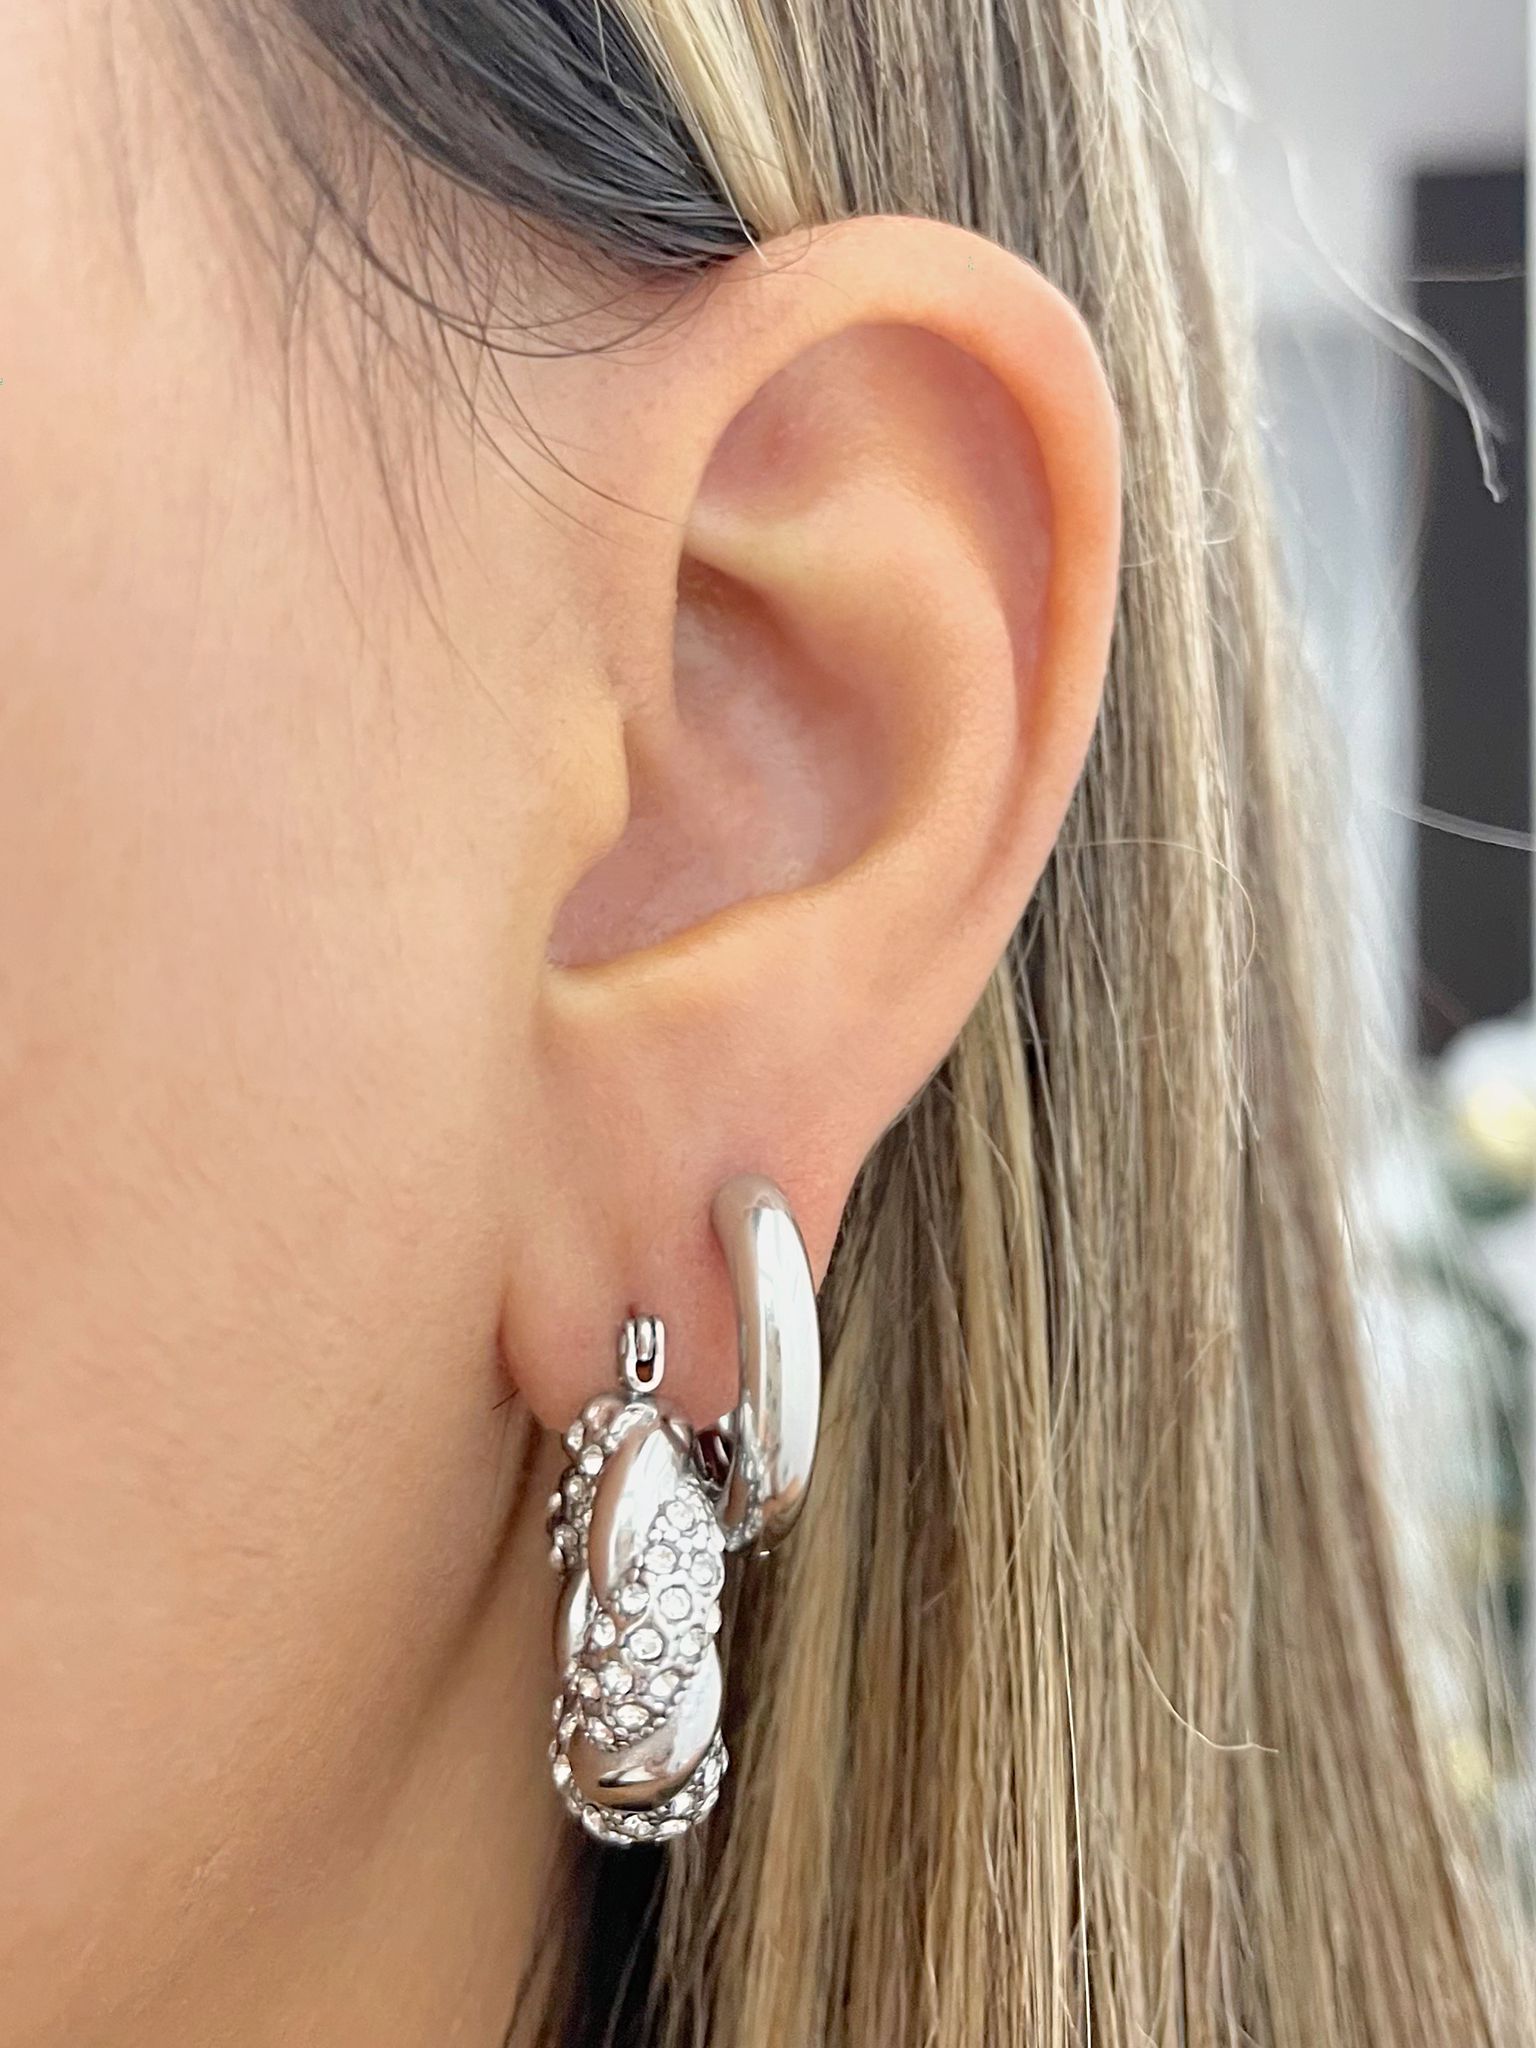 Classic silver hoops